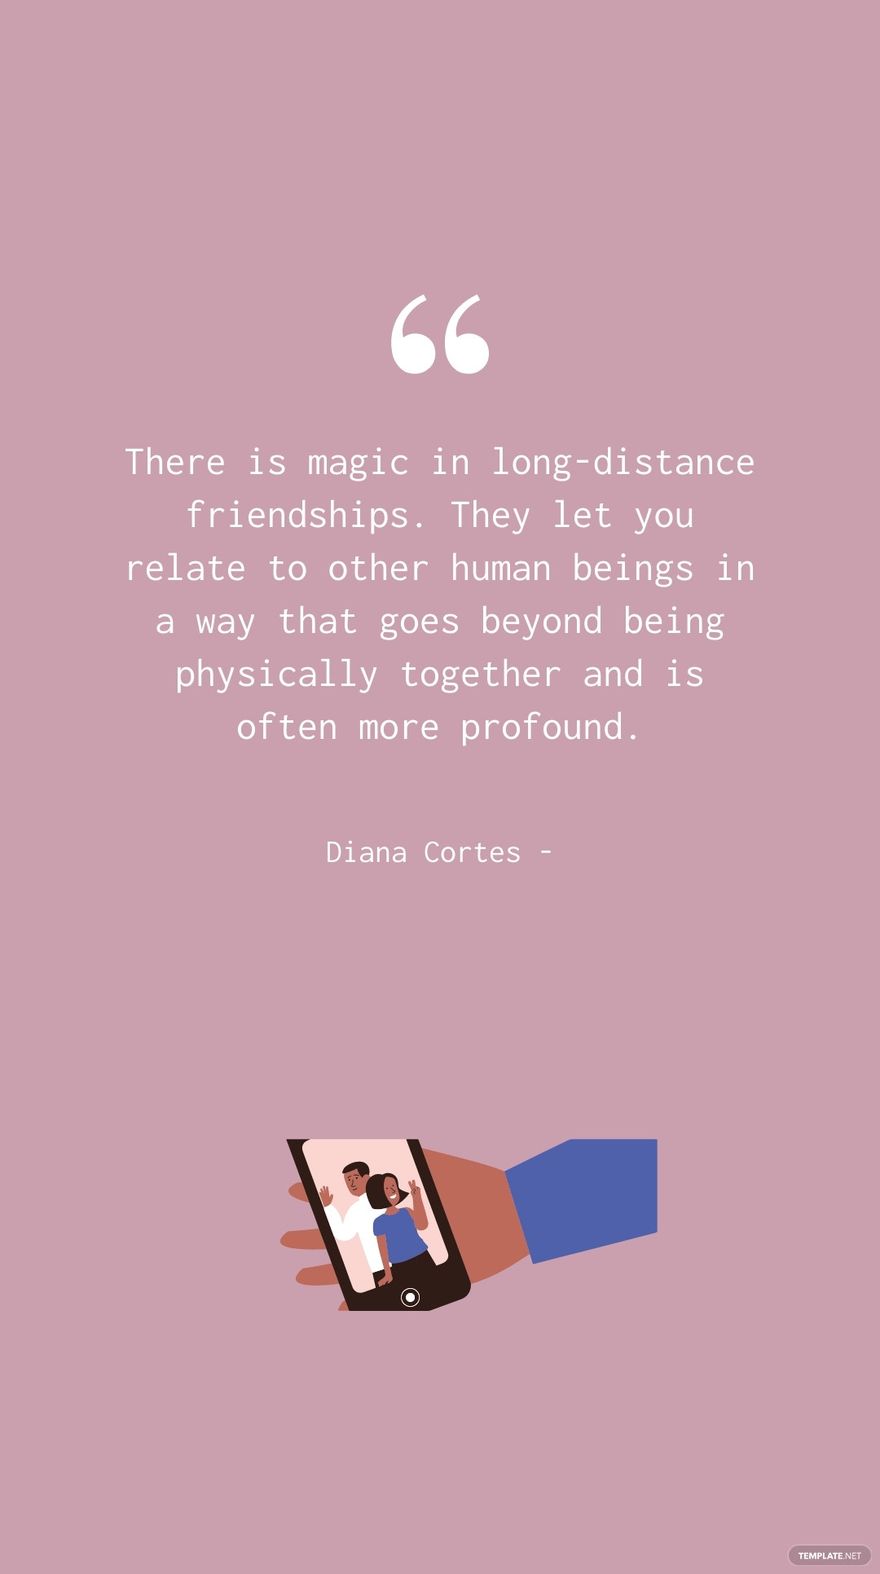 Diana Cortes - There is magic in long-distance friendships. They let you relate to other human beings in a way that goes beyond being physically together and is often more profound.